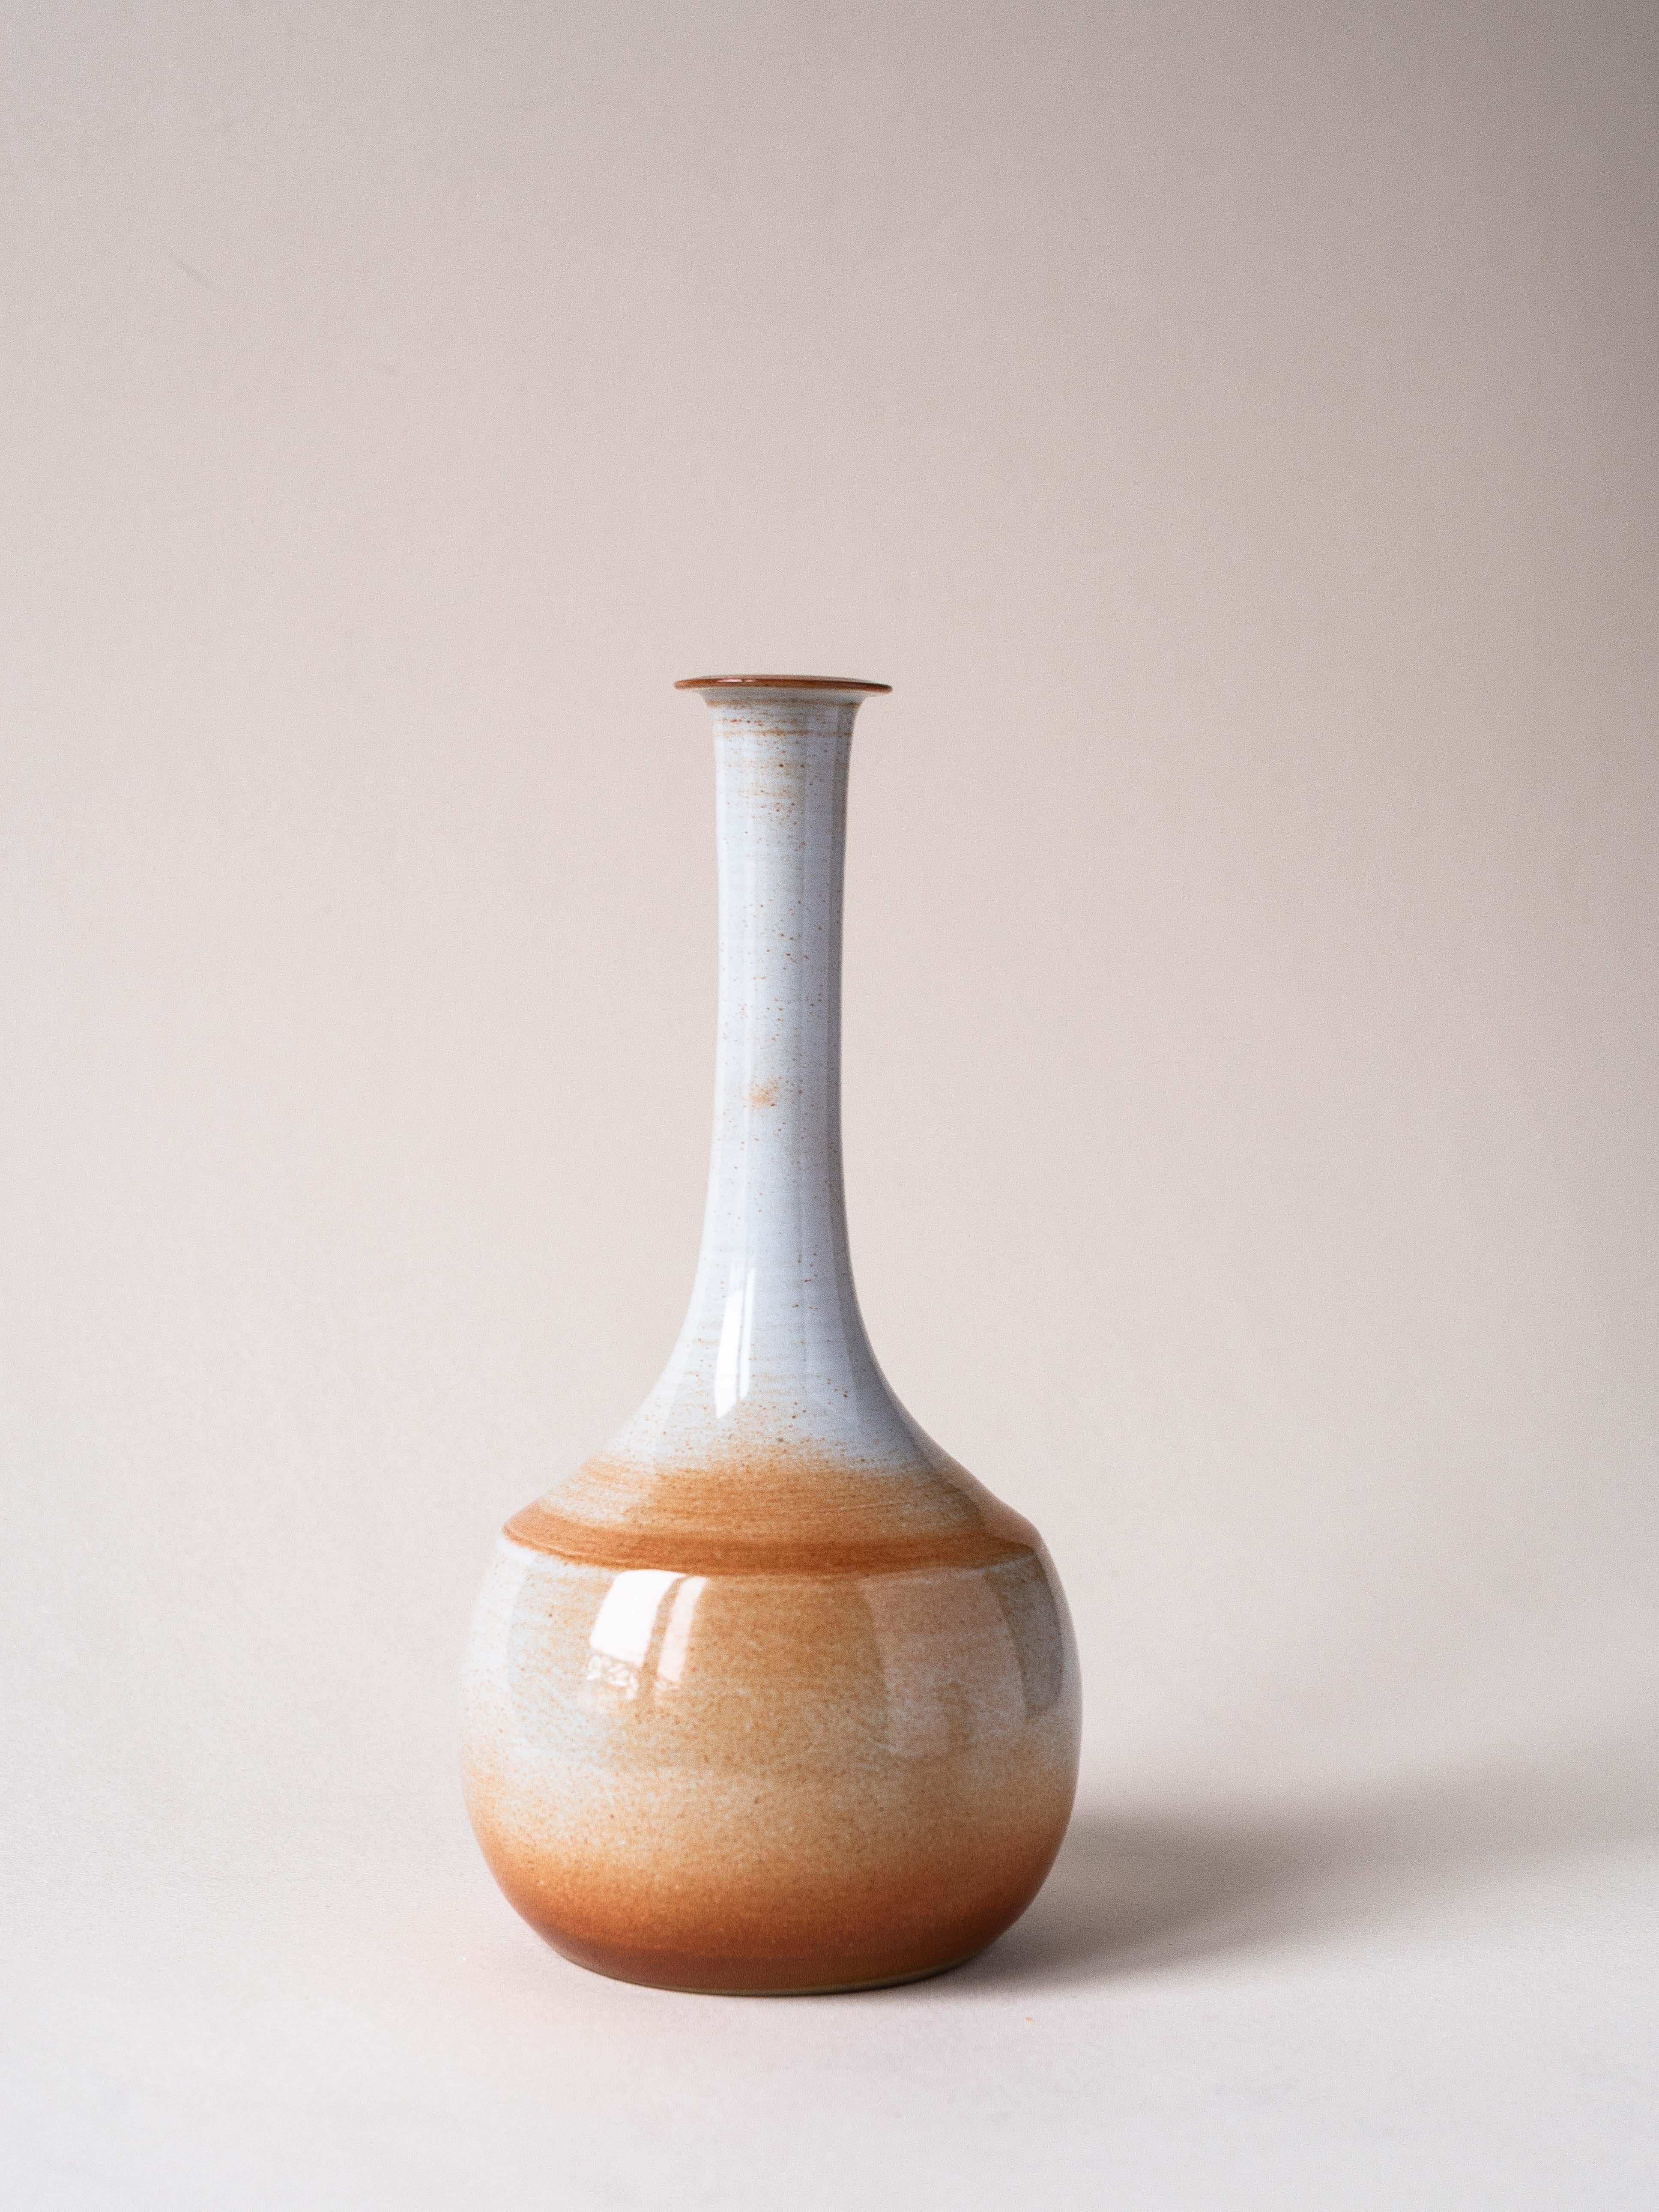 Ceramic Vase or Solifore, France 1970s.

Elegant enamel in beige, orange and brown color.

Chic design !

Diameter of the hole on top : 2,5cm

A very tiny loss on top see the last photo.